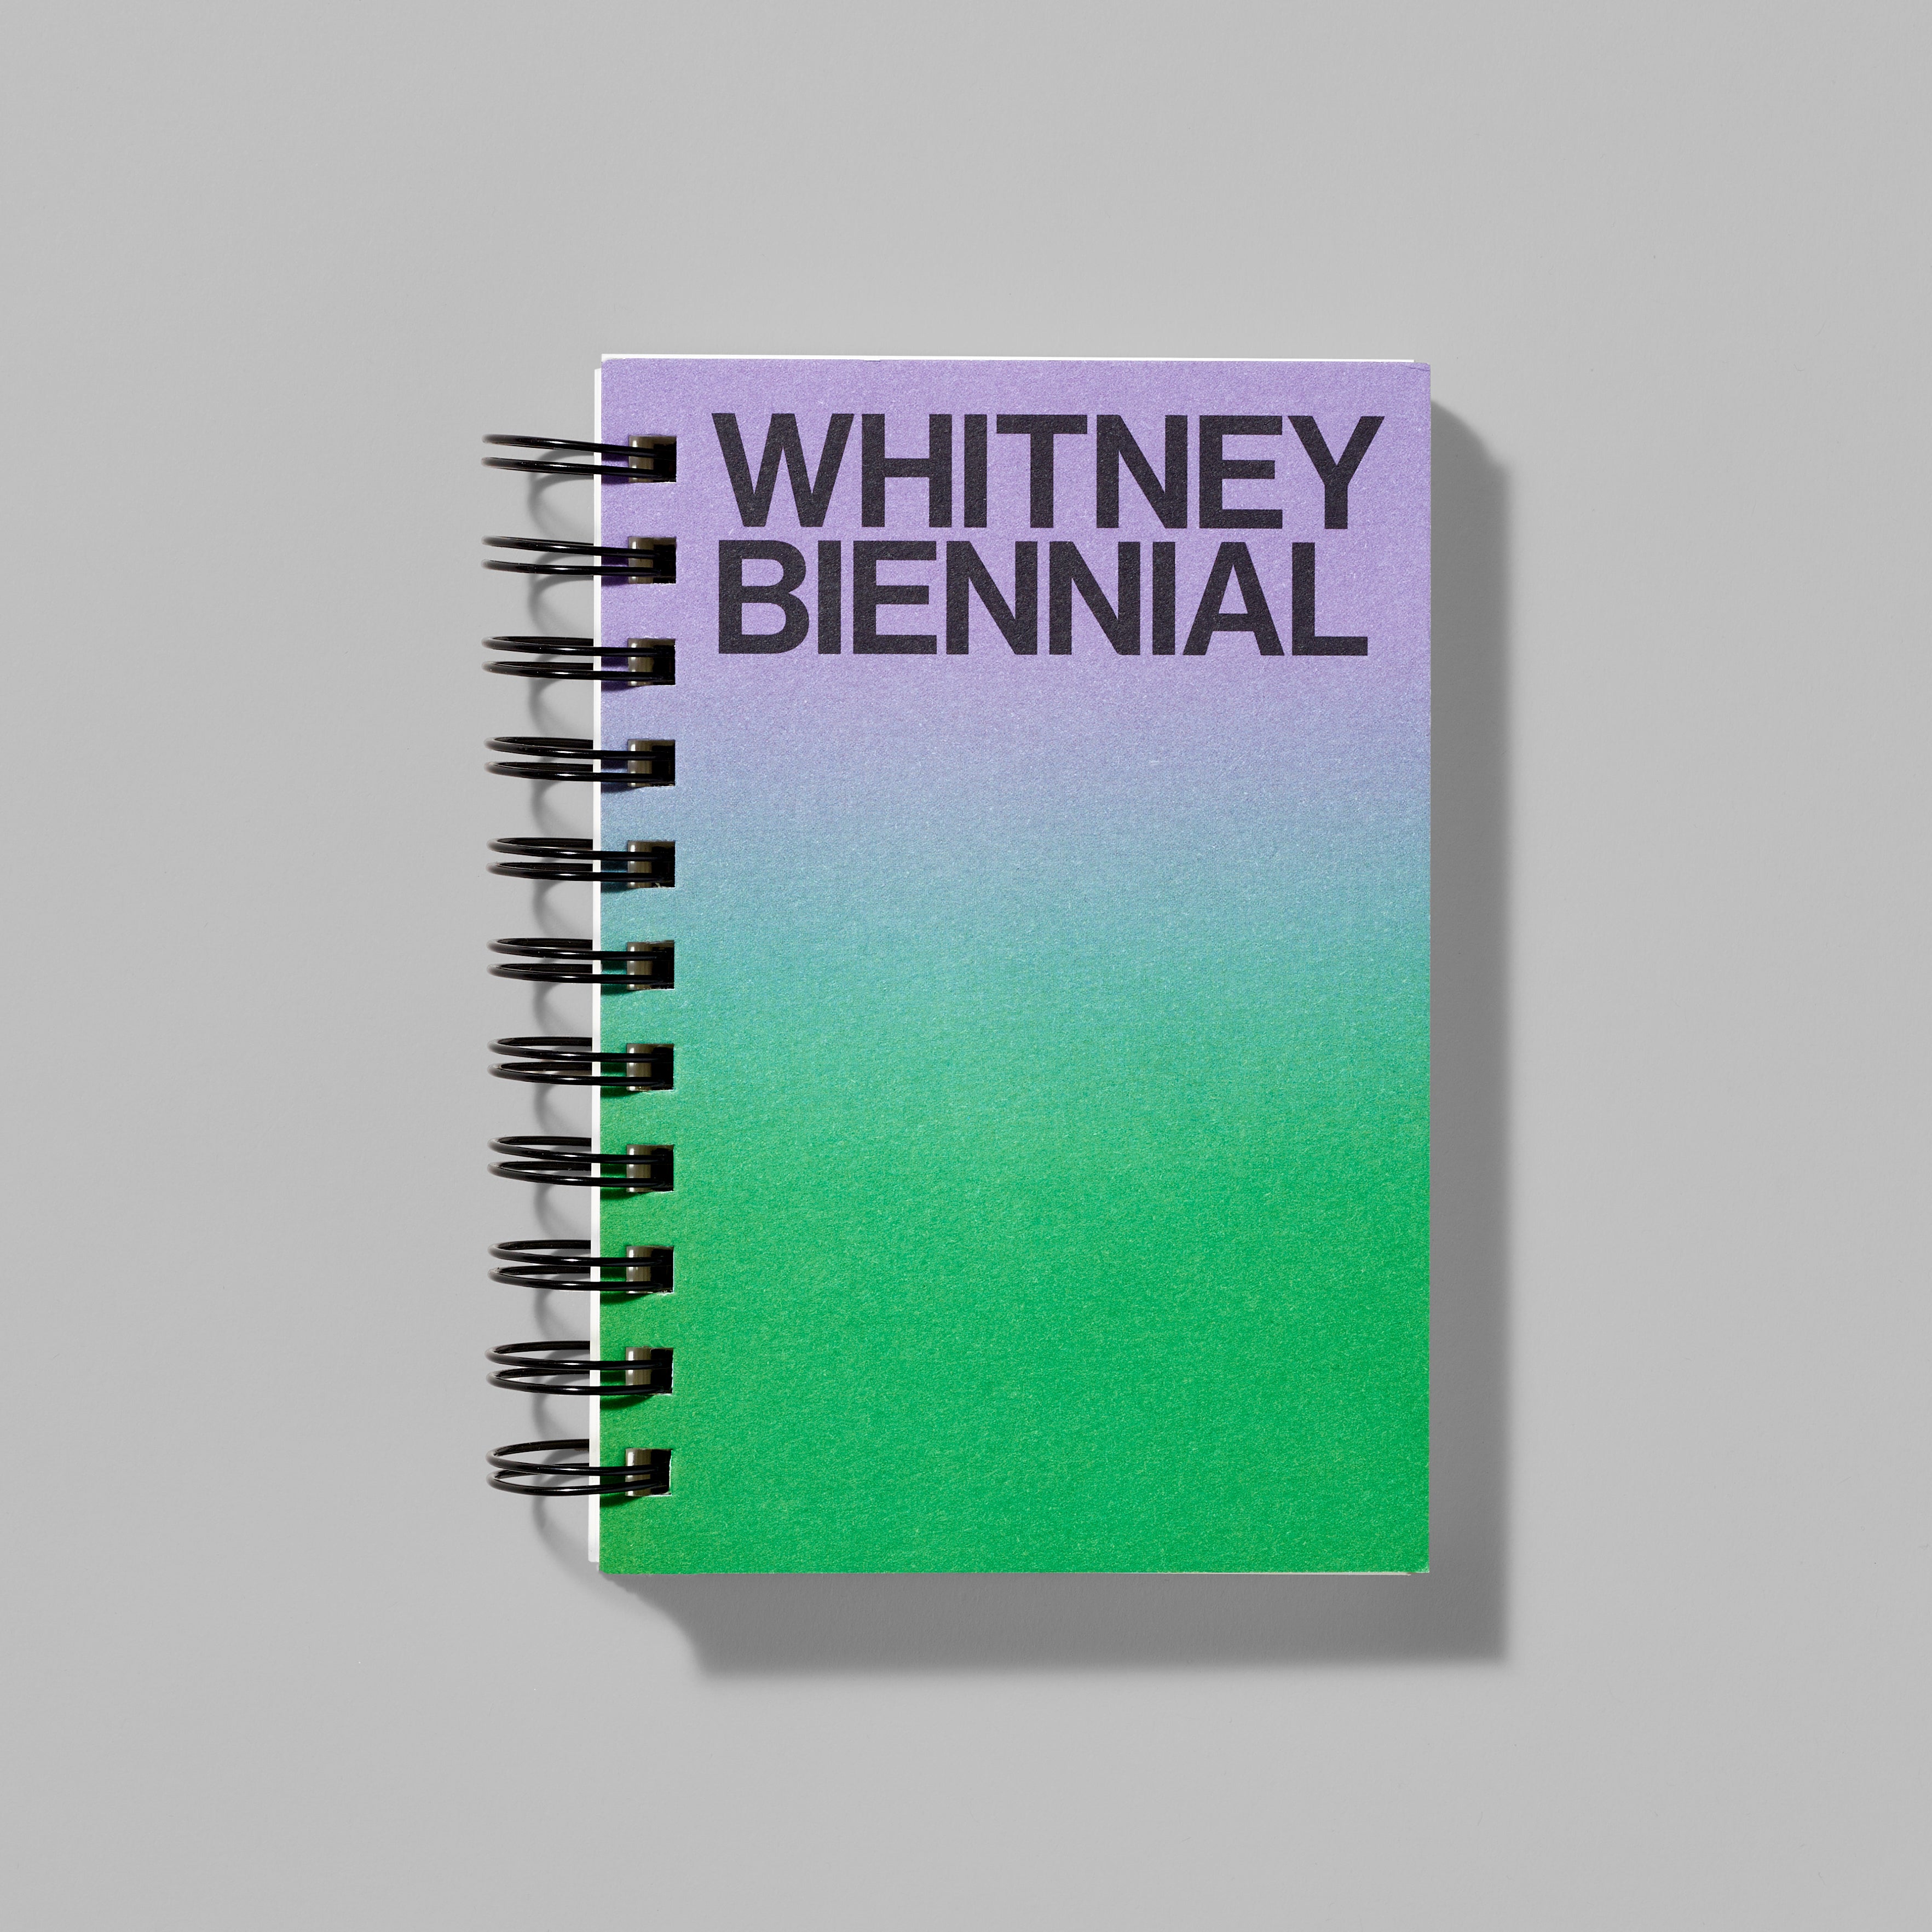 Green and purple gradient spiral notebook featuring Whitney Biennial in black text